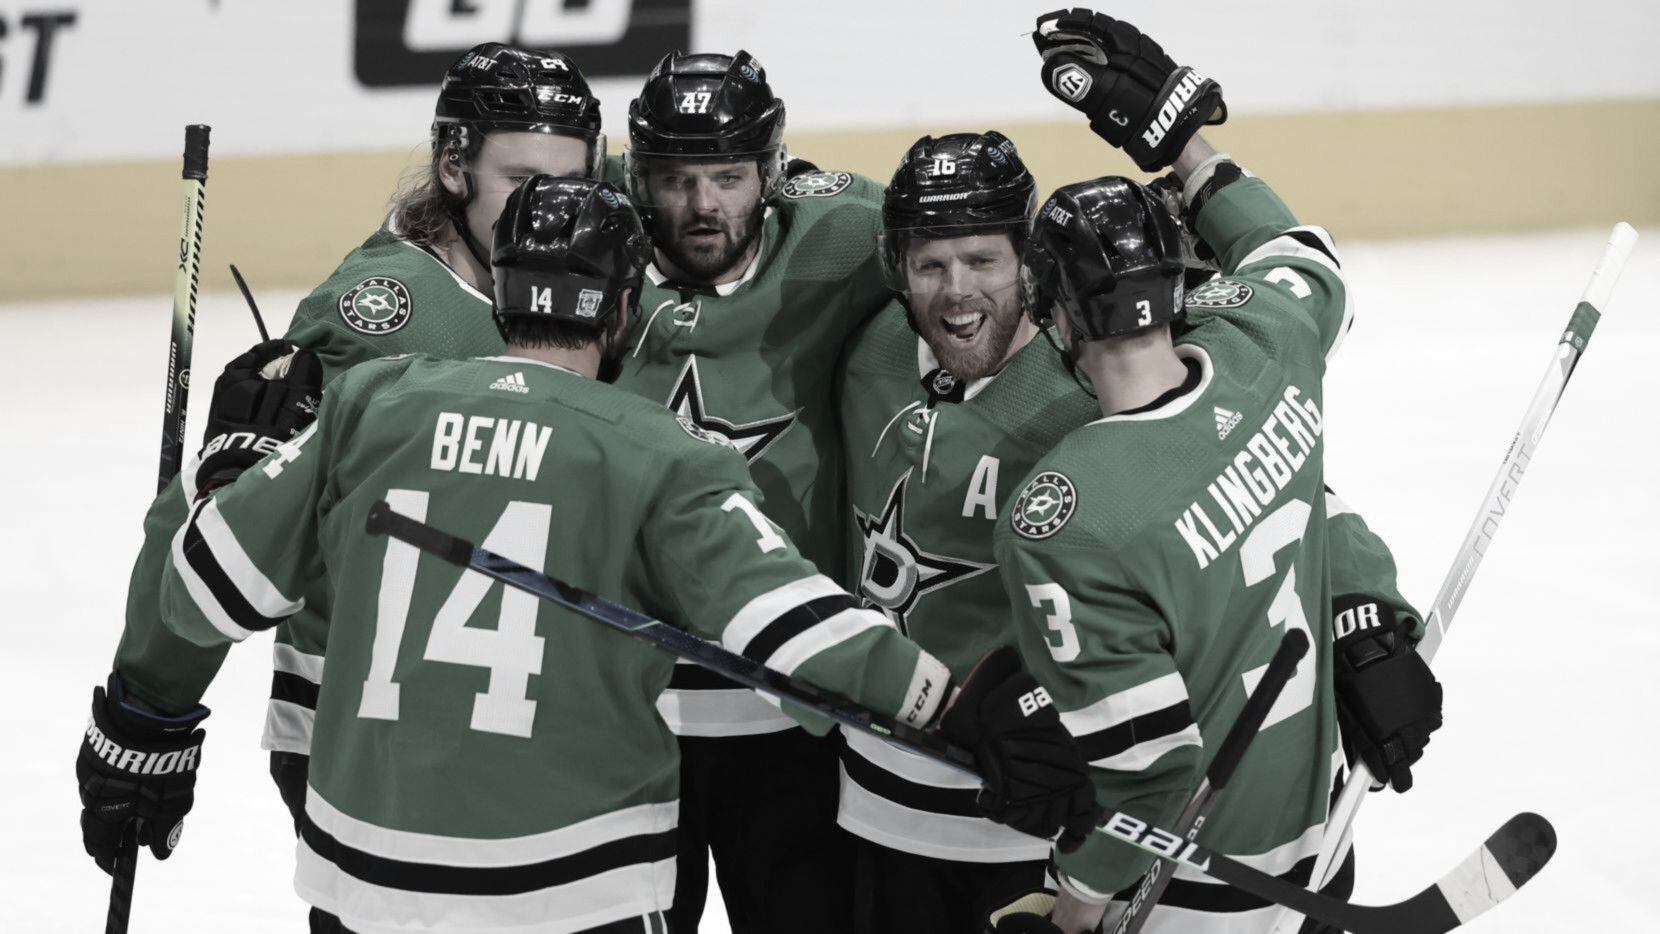 Dallas Stars right wing Alexander Radulov (47) is congratulated by teammates Joe Pavelski (16), Jamie Benn (14), John Klingberg (3), and Roope Hintz (24) after Radulov scored a goal against the Nashville Predators in the Stars home opener at American Airlines Center on Friday, January 22, 2021.